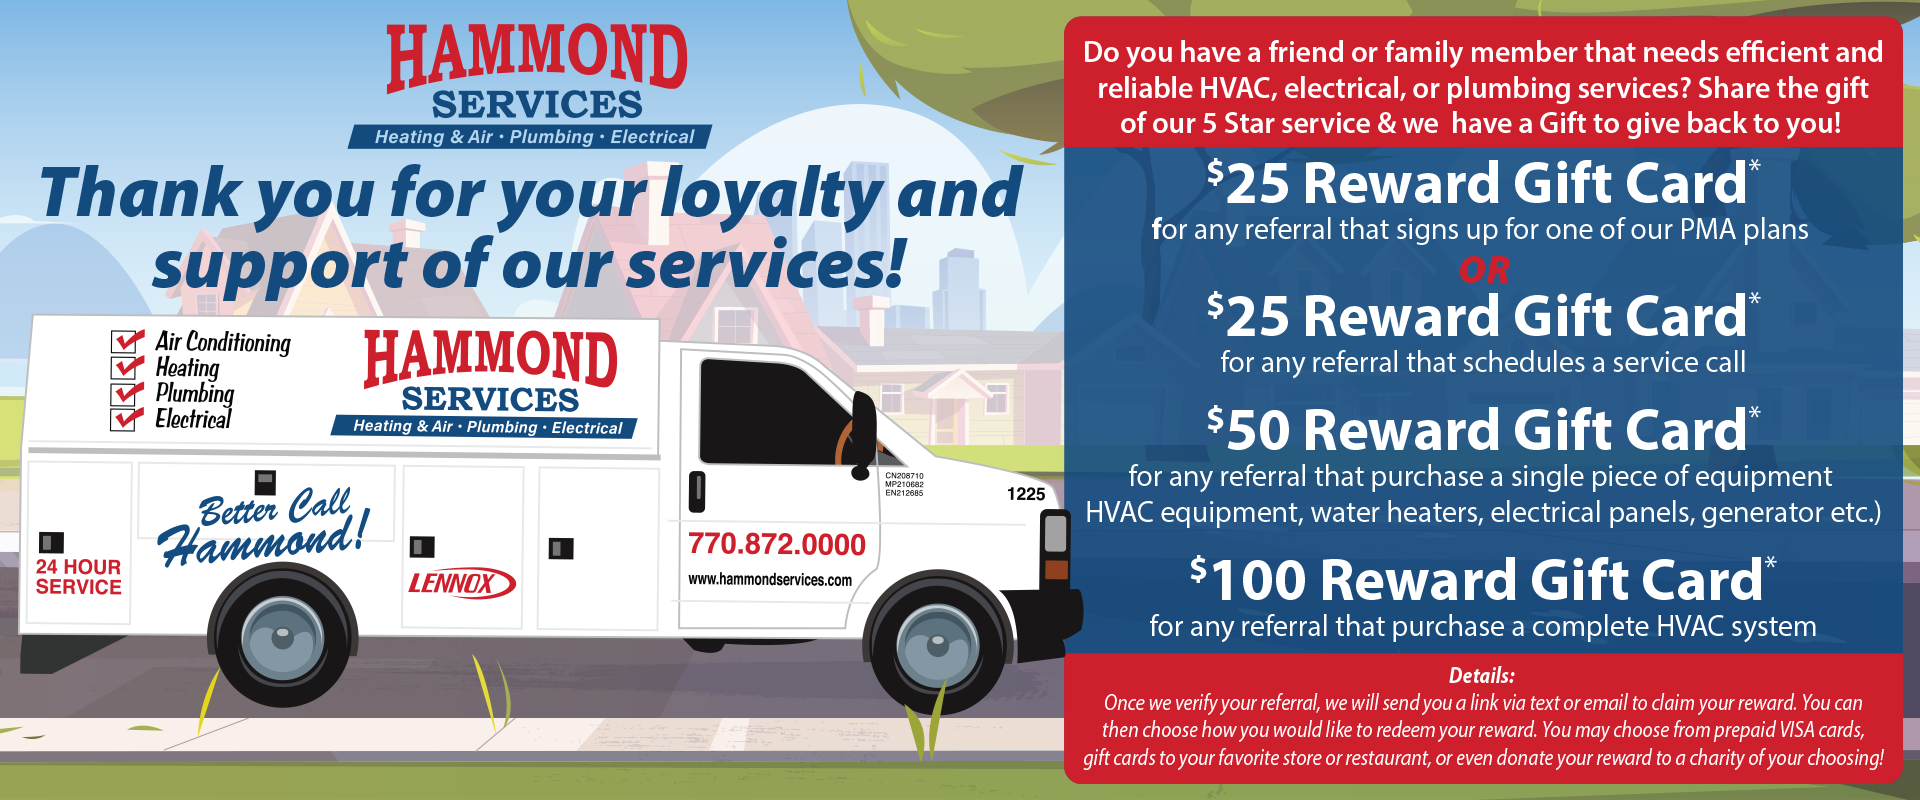 Hammond Referral Program Graphic - Call for details!